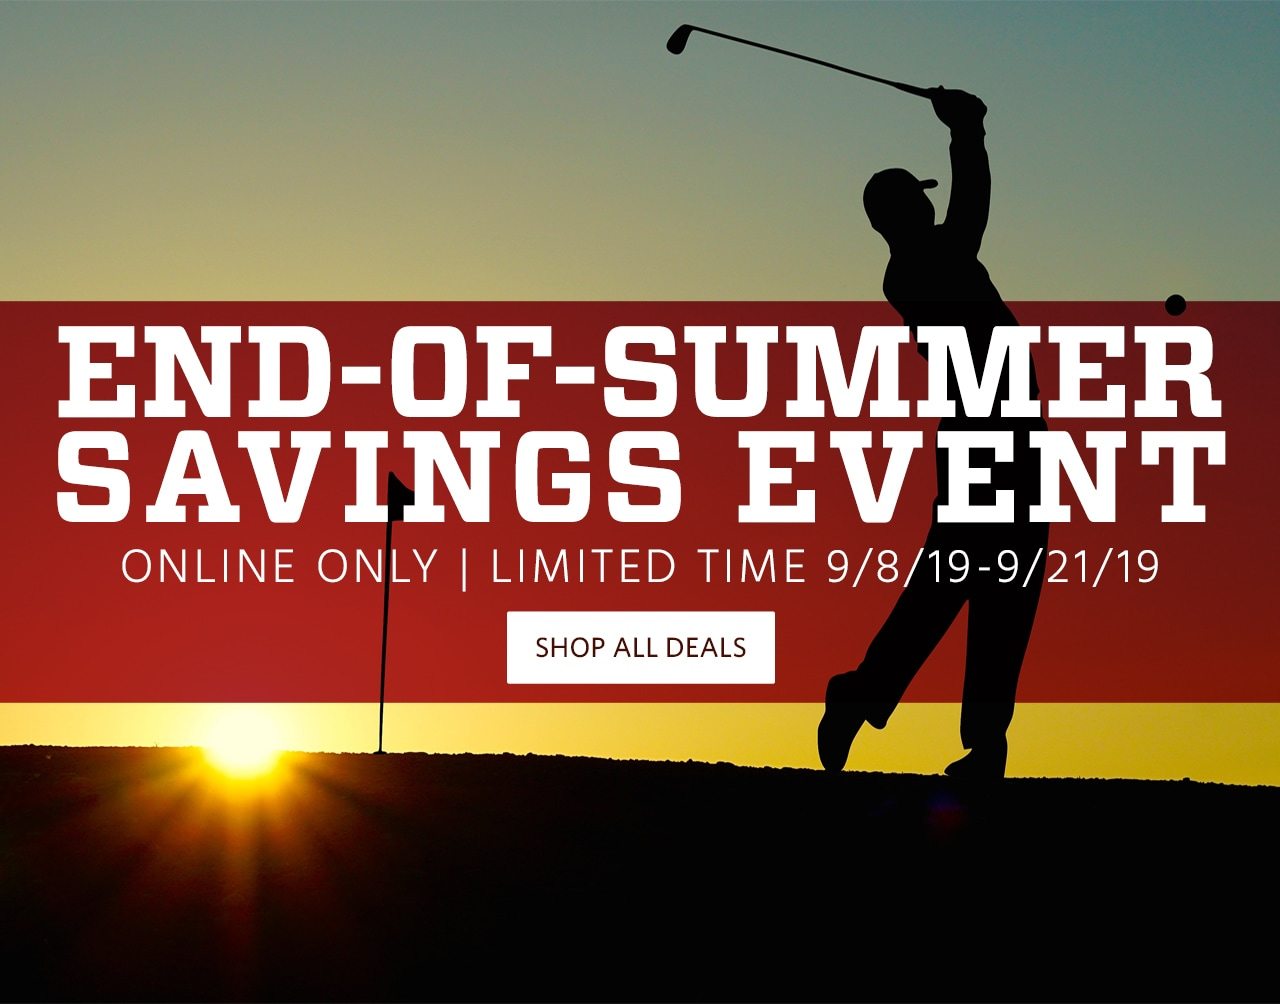 End of Summer Savings Event. Online Only. Limited Time. 9/8/19 to 9/21/19. Shop All Deals.